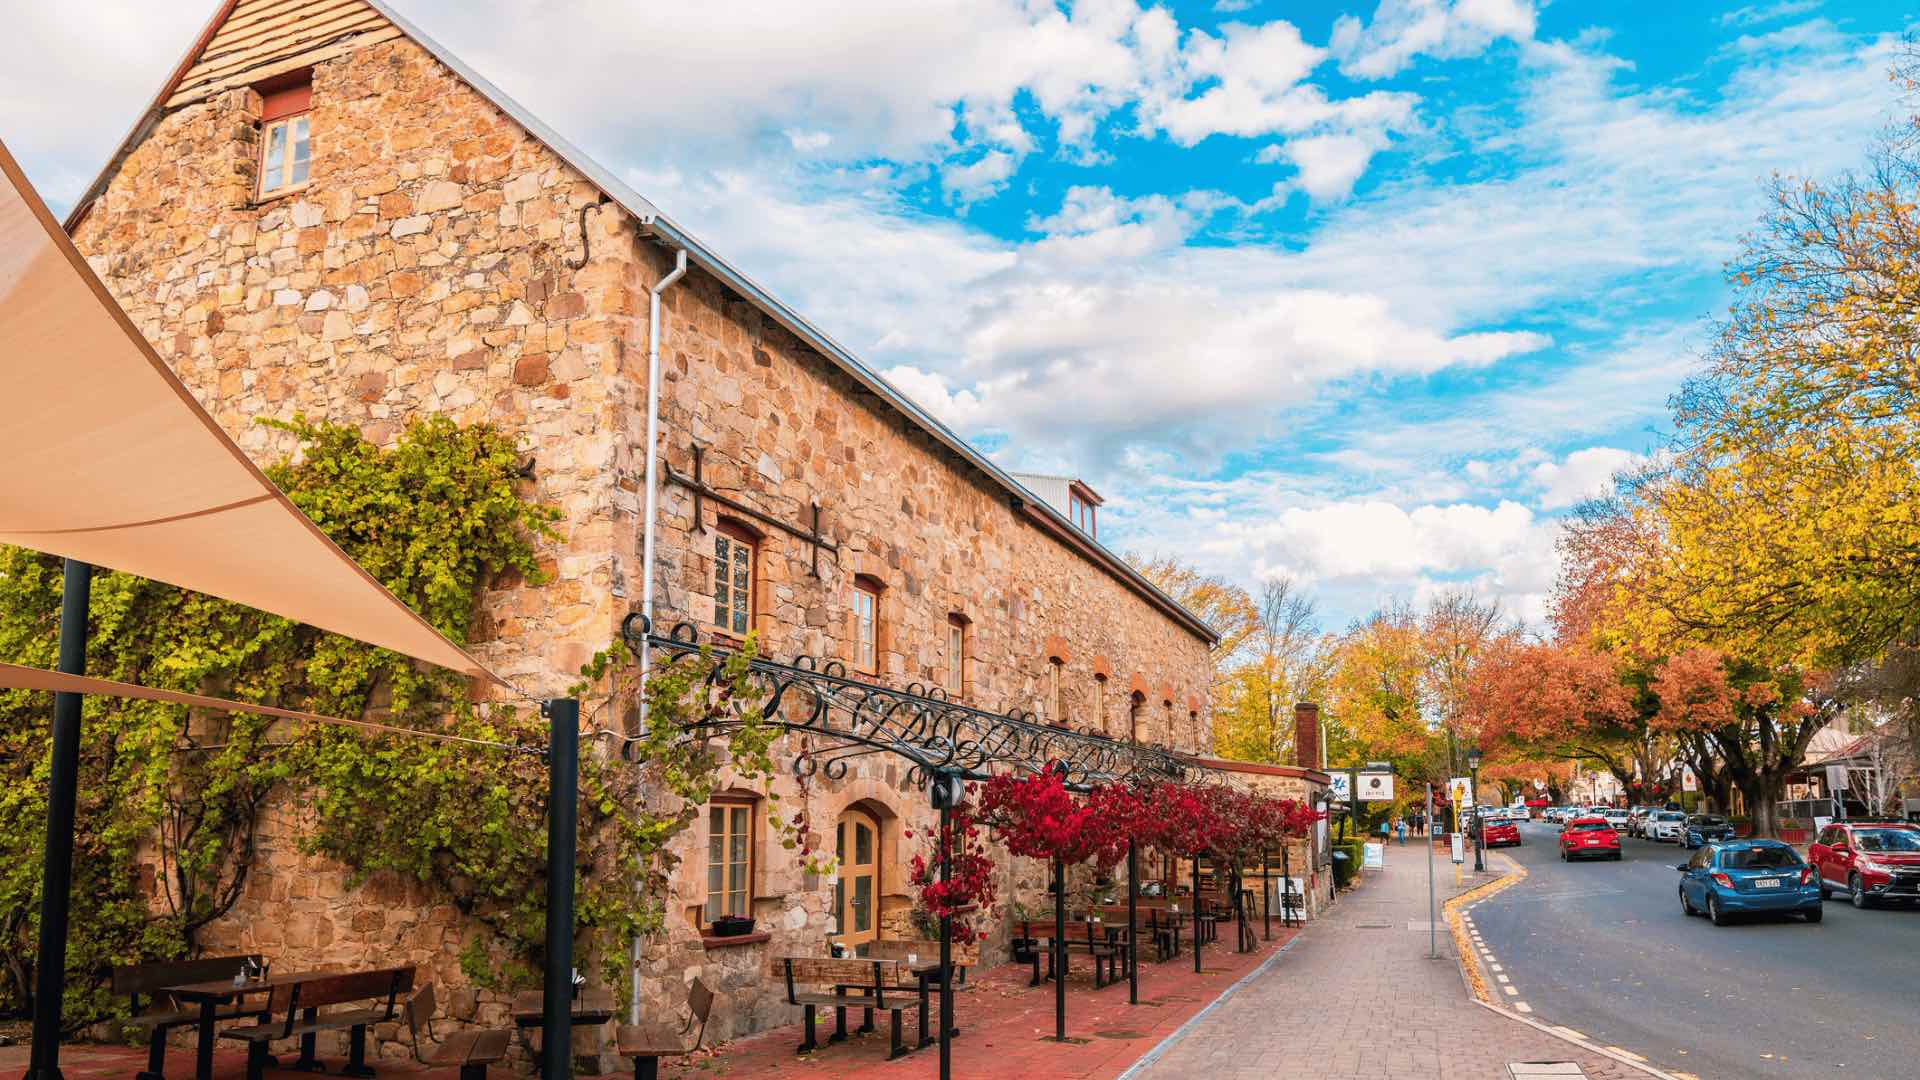 A tree-lined street in front of a brick building in Hahndorf.